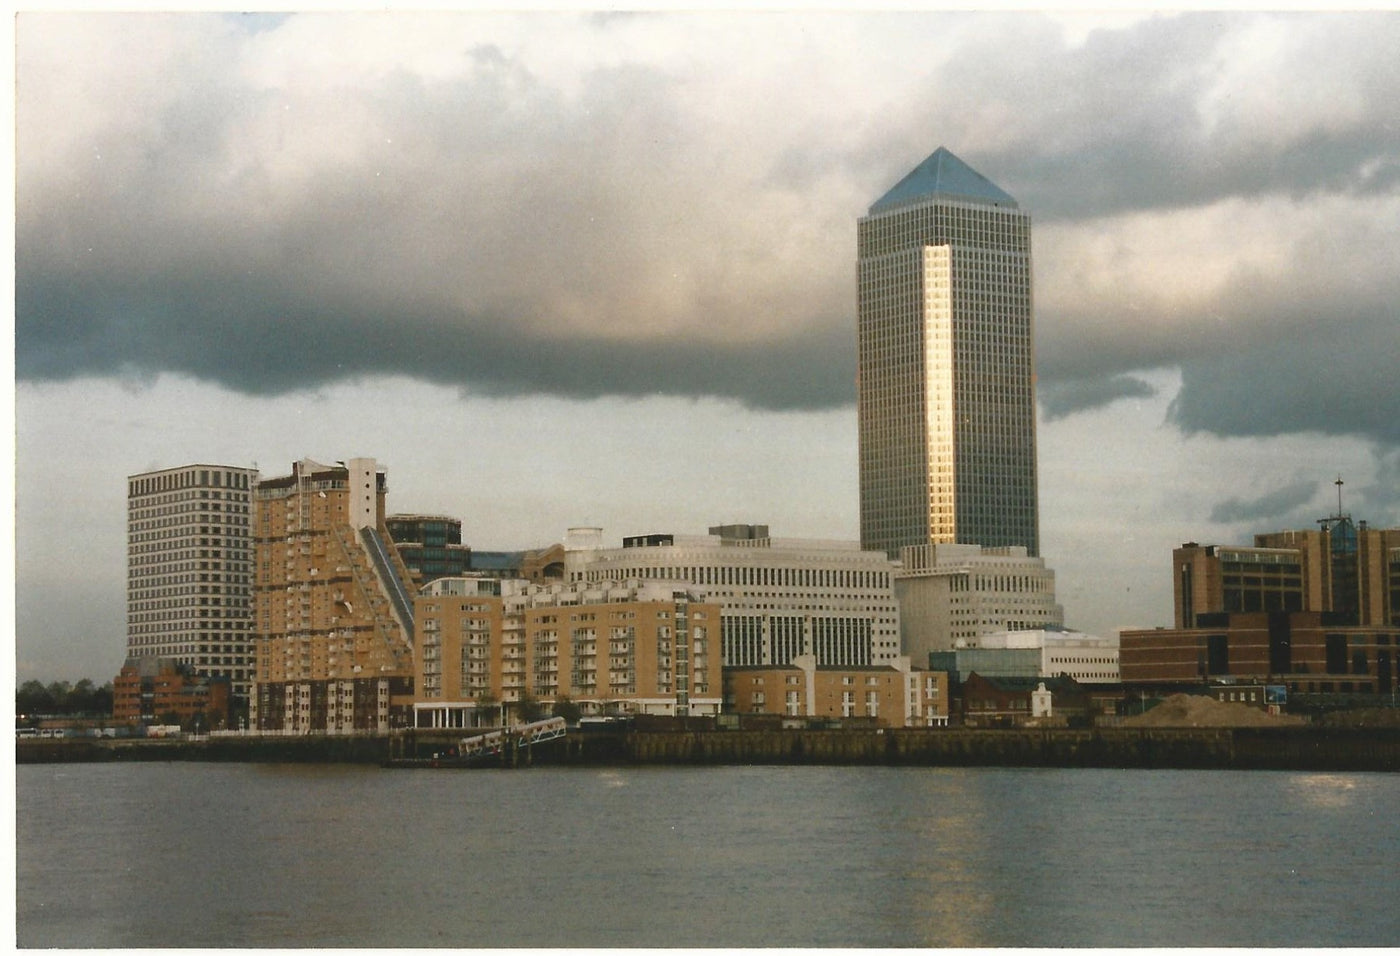 Canary Wharf and cloud photograph by Reginald Beer